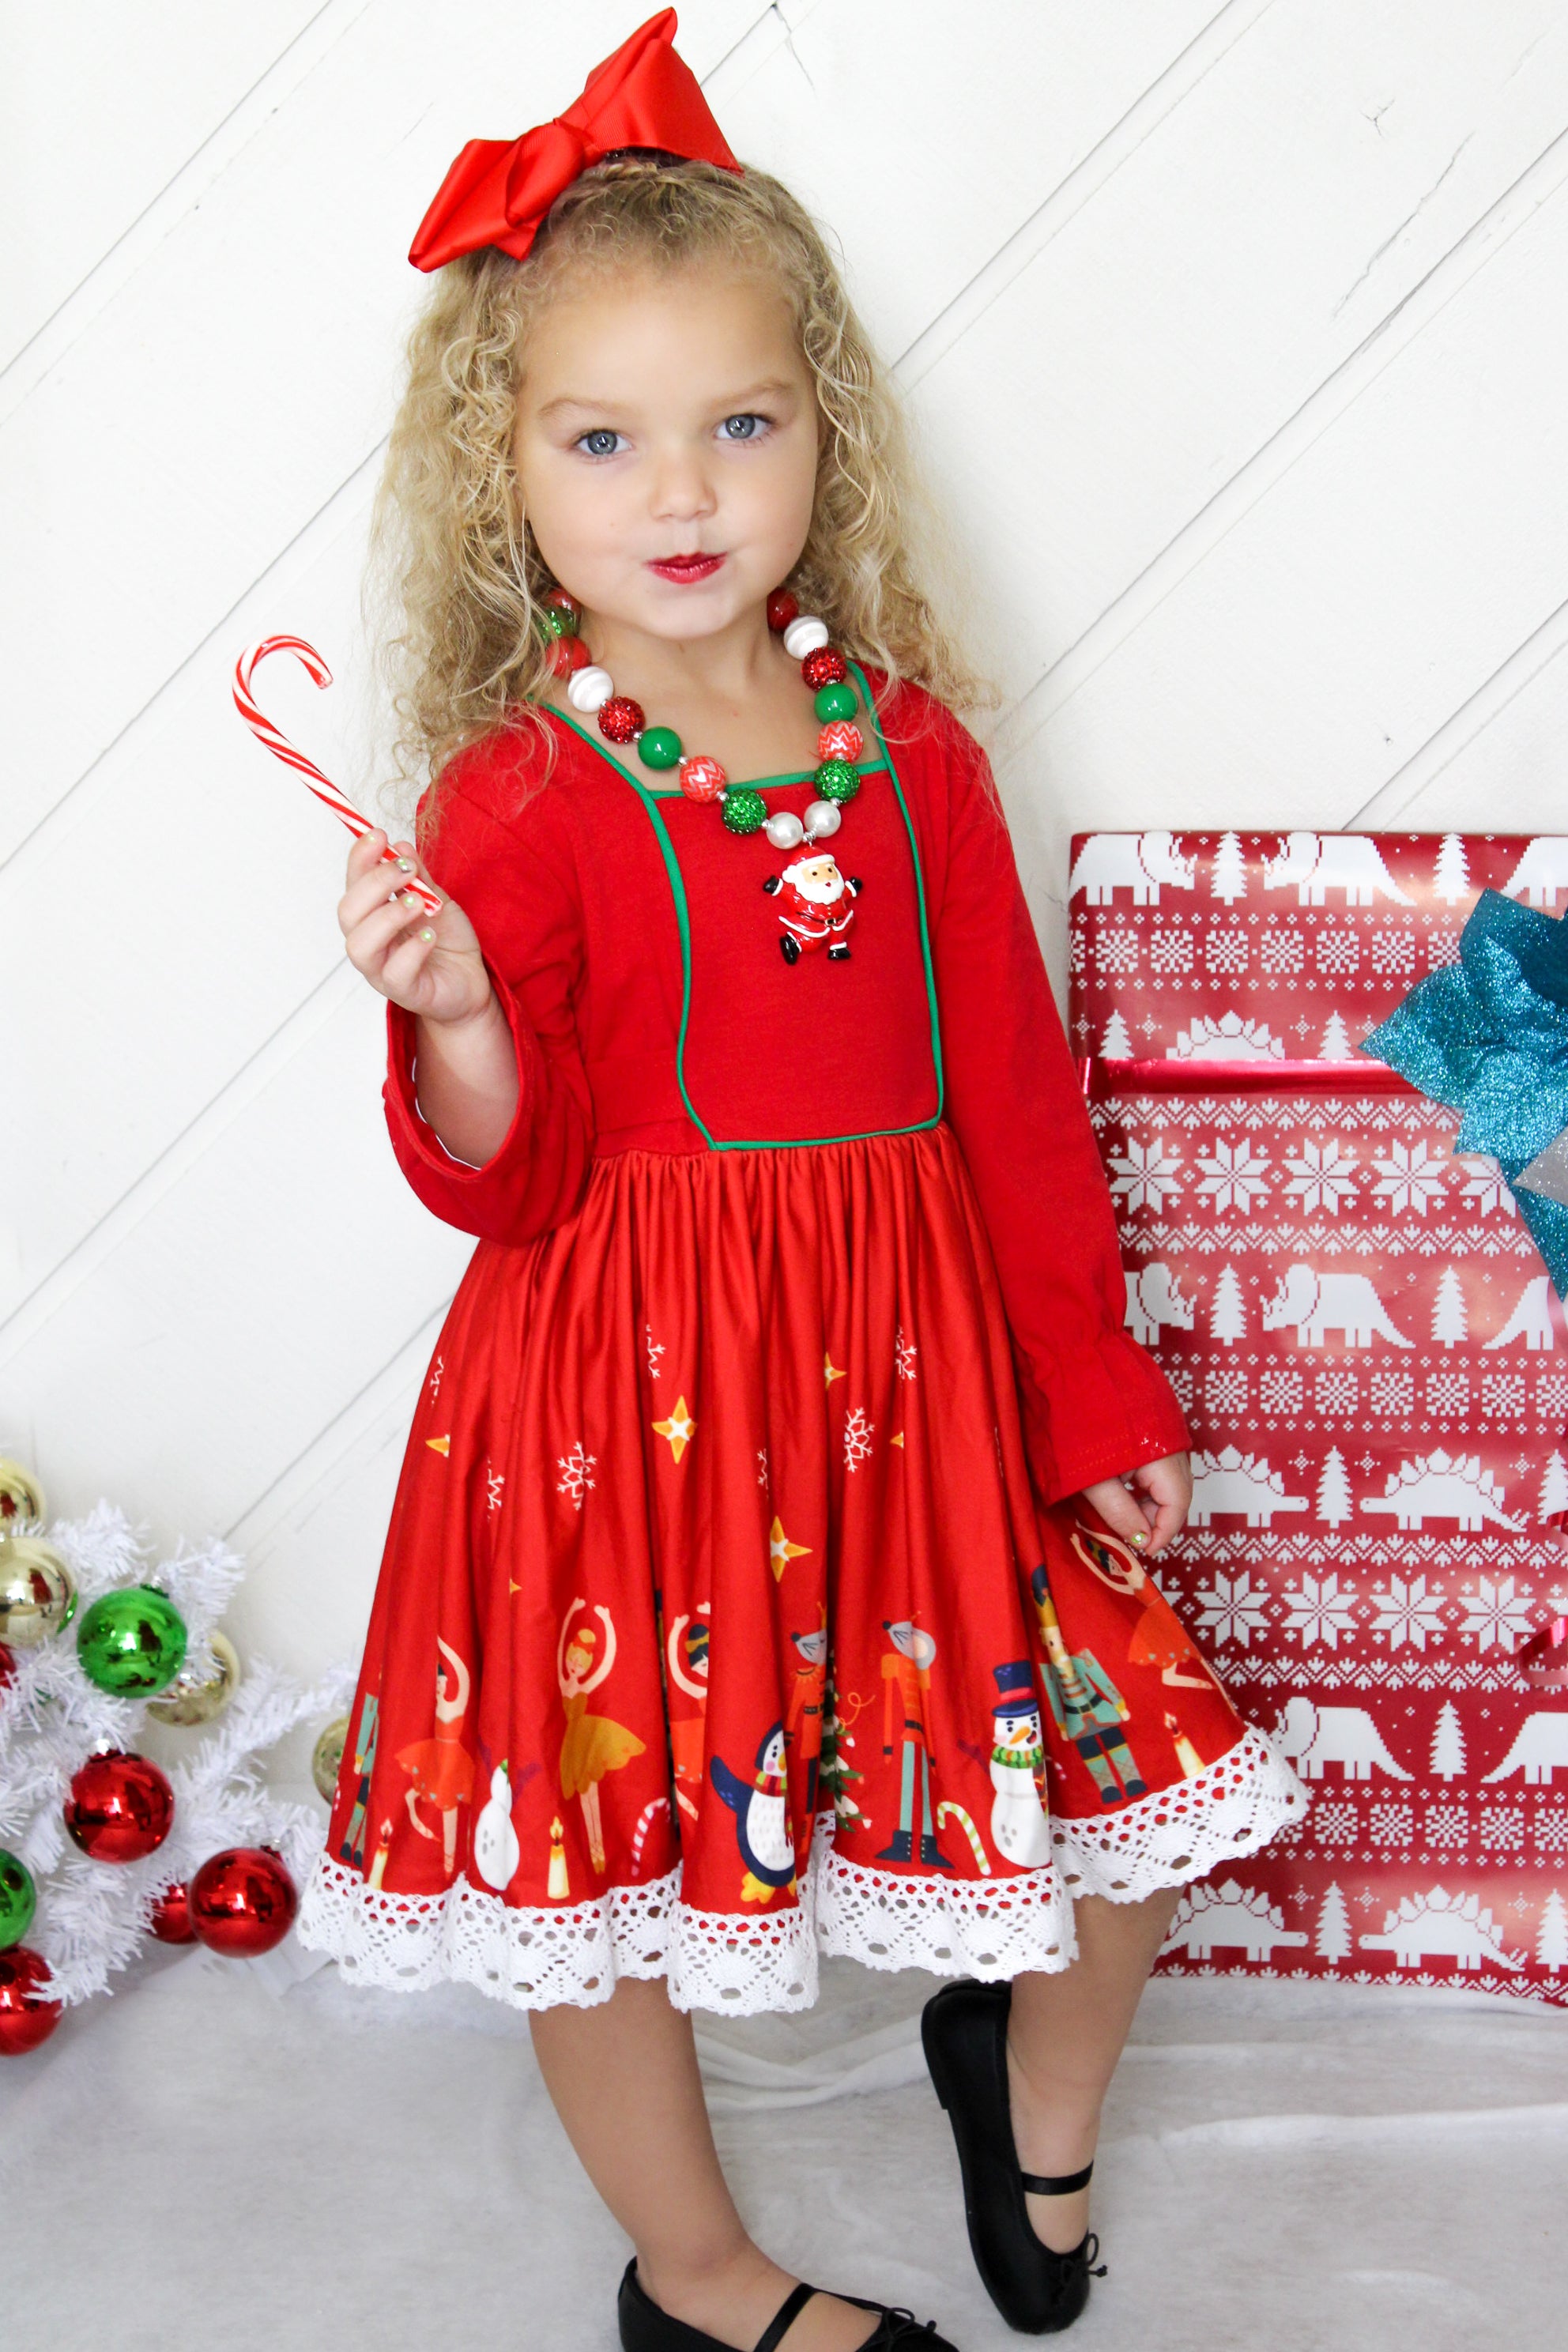 Girls Christmas Holiday Nutcracker Ballet Soldier Dress - Red/Red (Free Bloomers For Baby Sizes) - Angeline Kids